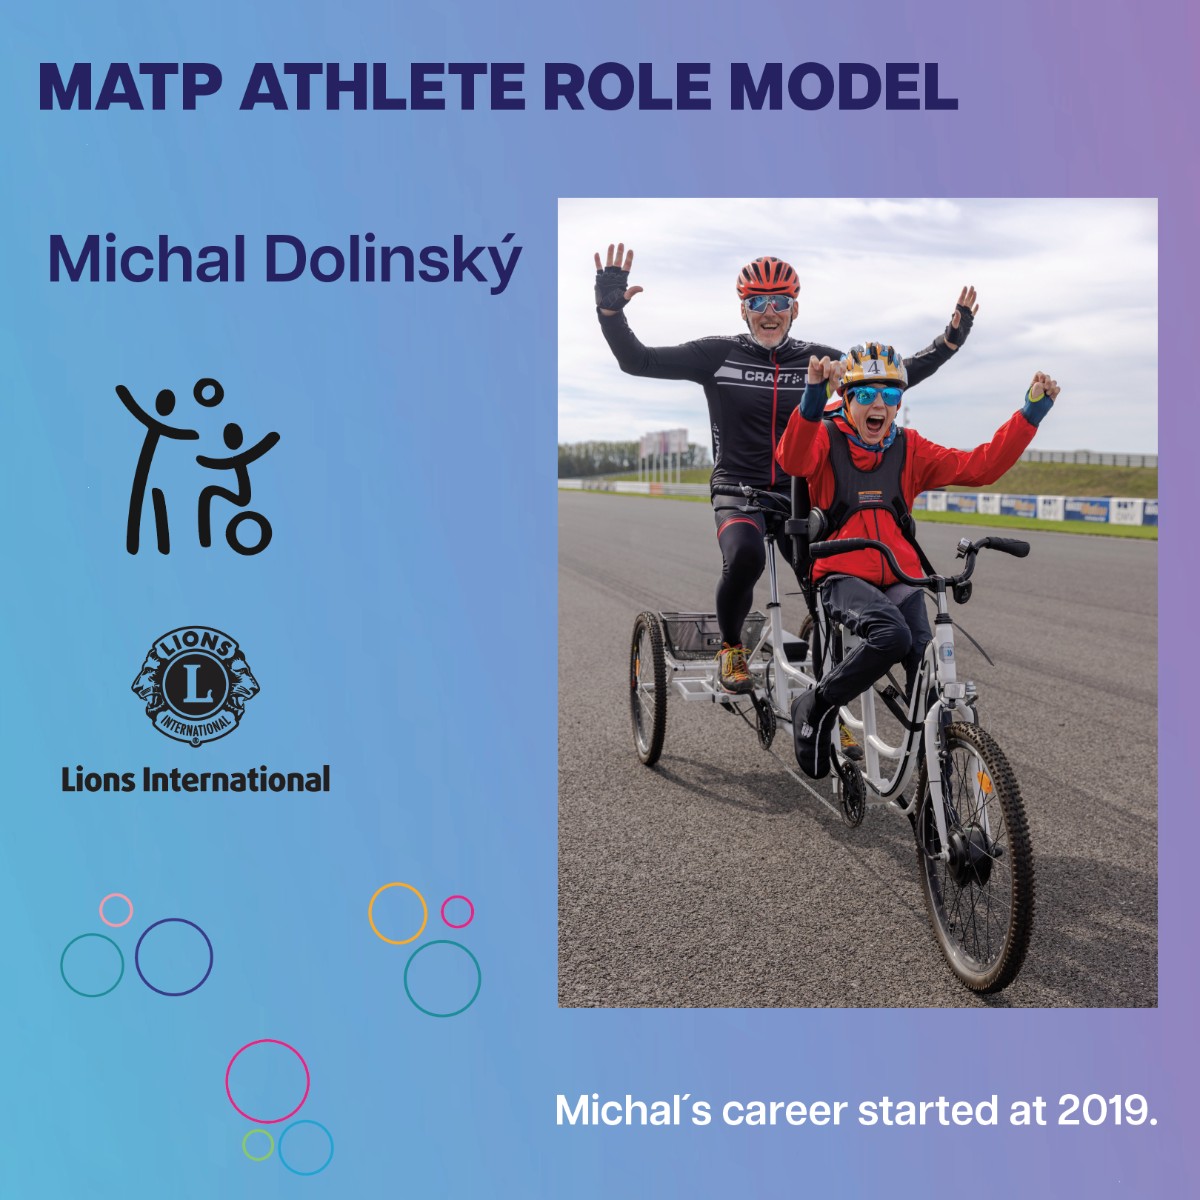 Introducing MATP ATHLETE ROLE MODEL Michal Dolinský! Michal is a cyclist and skier with Special Olympics Slovakia who is paving the way for more Motor Activity Training program (MATP) athletes to compete in sports. @soeuropeeurasia @lionsclubs #MATPAthleteRoleModel